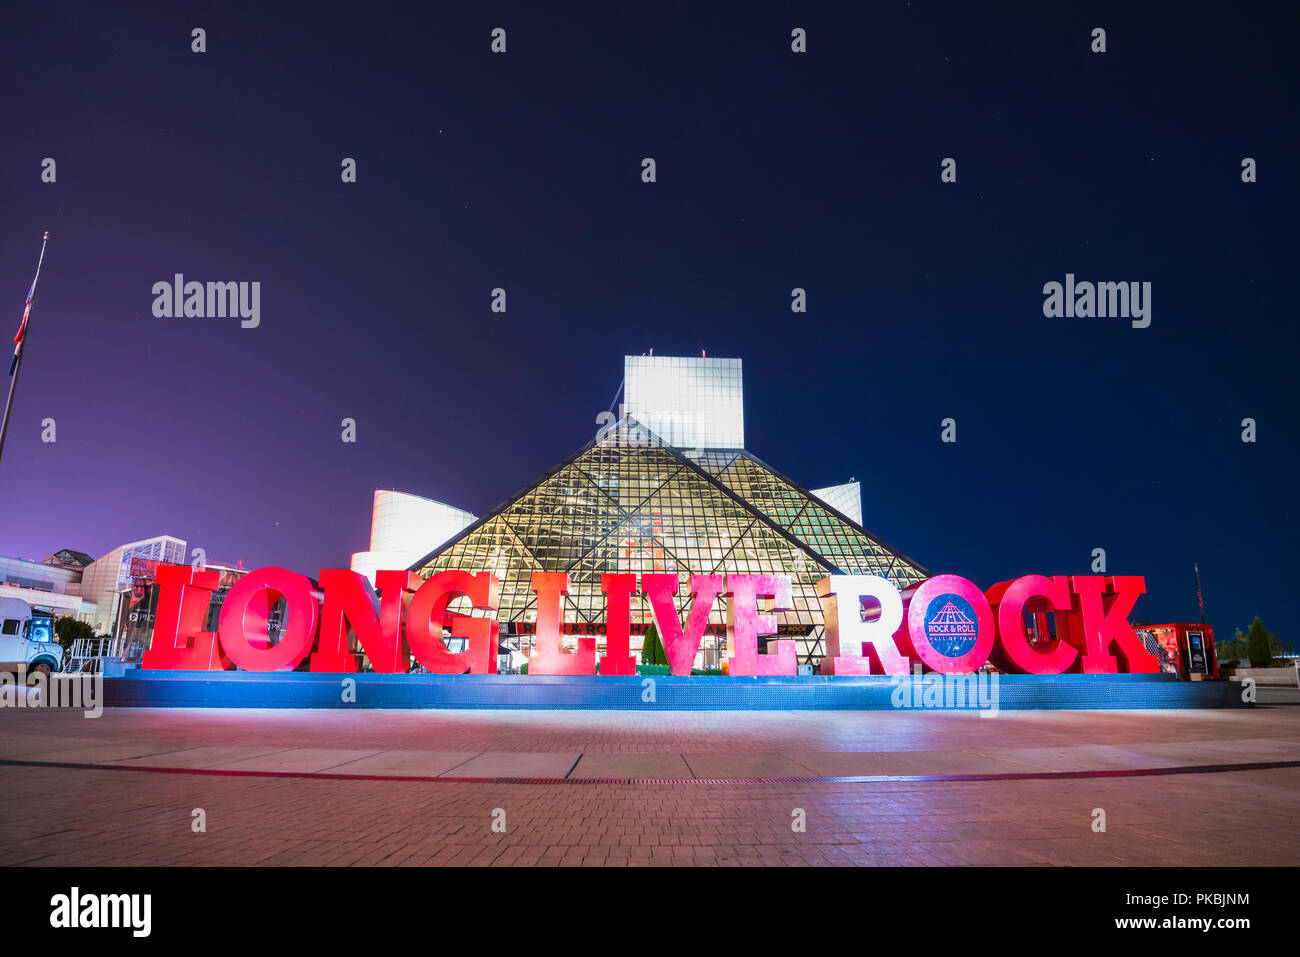 rock and roll hall of frame.cleveland,ohio,usa.2-19-17: rock and roll hall of frame at night. Stock Photo